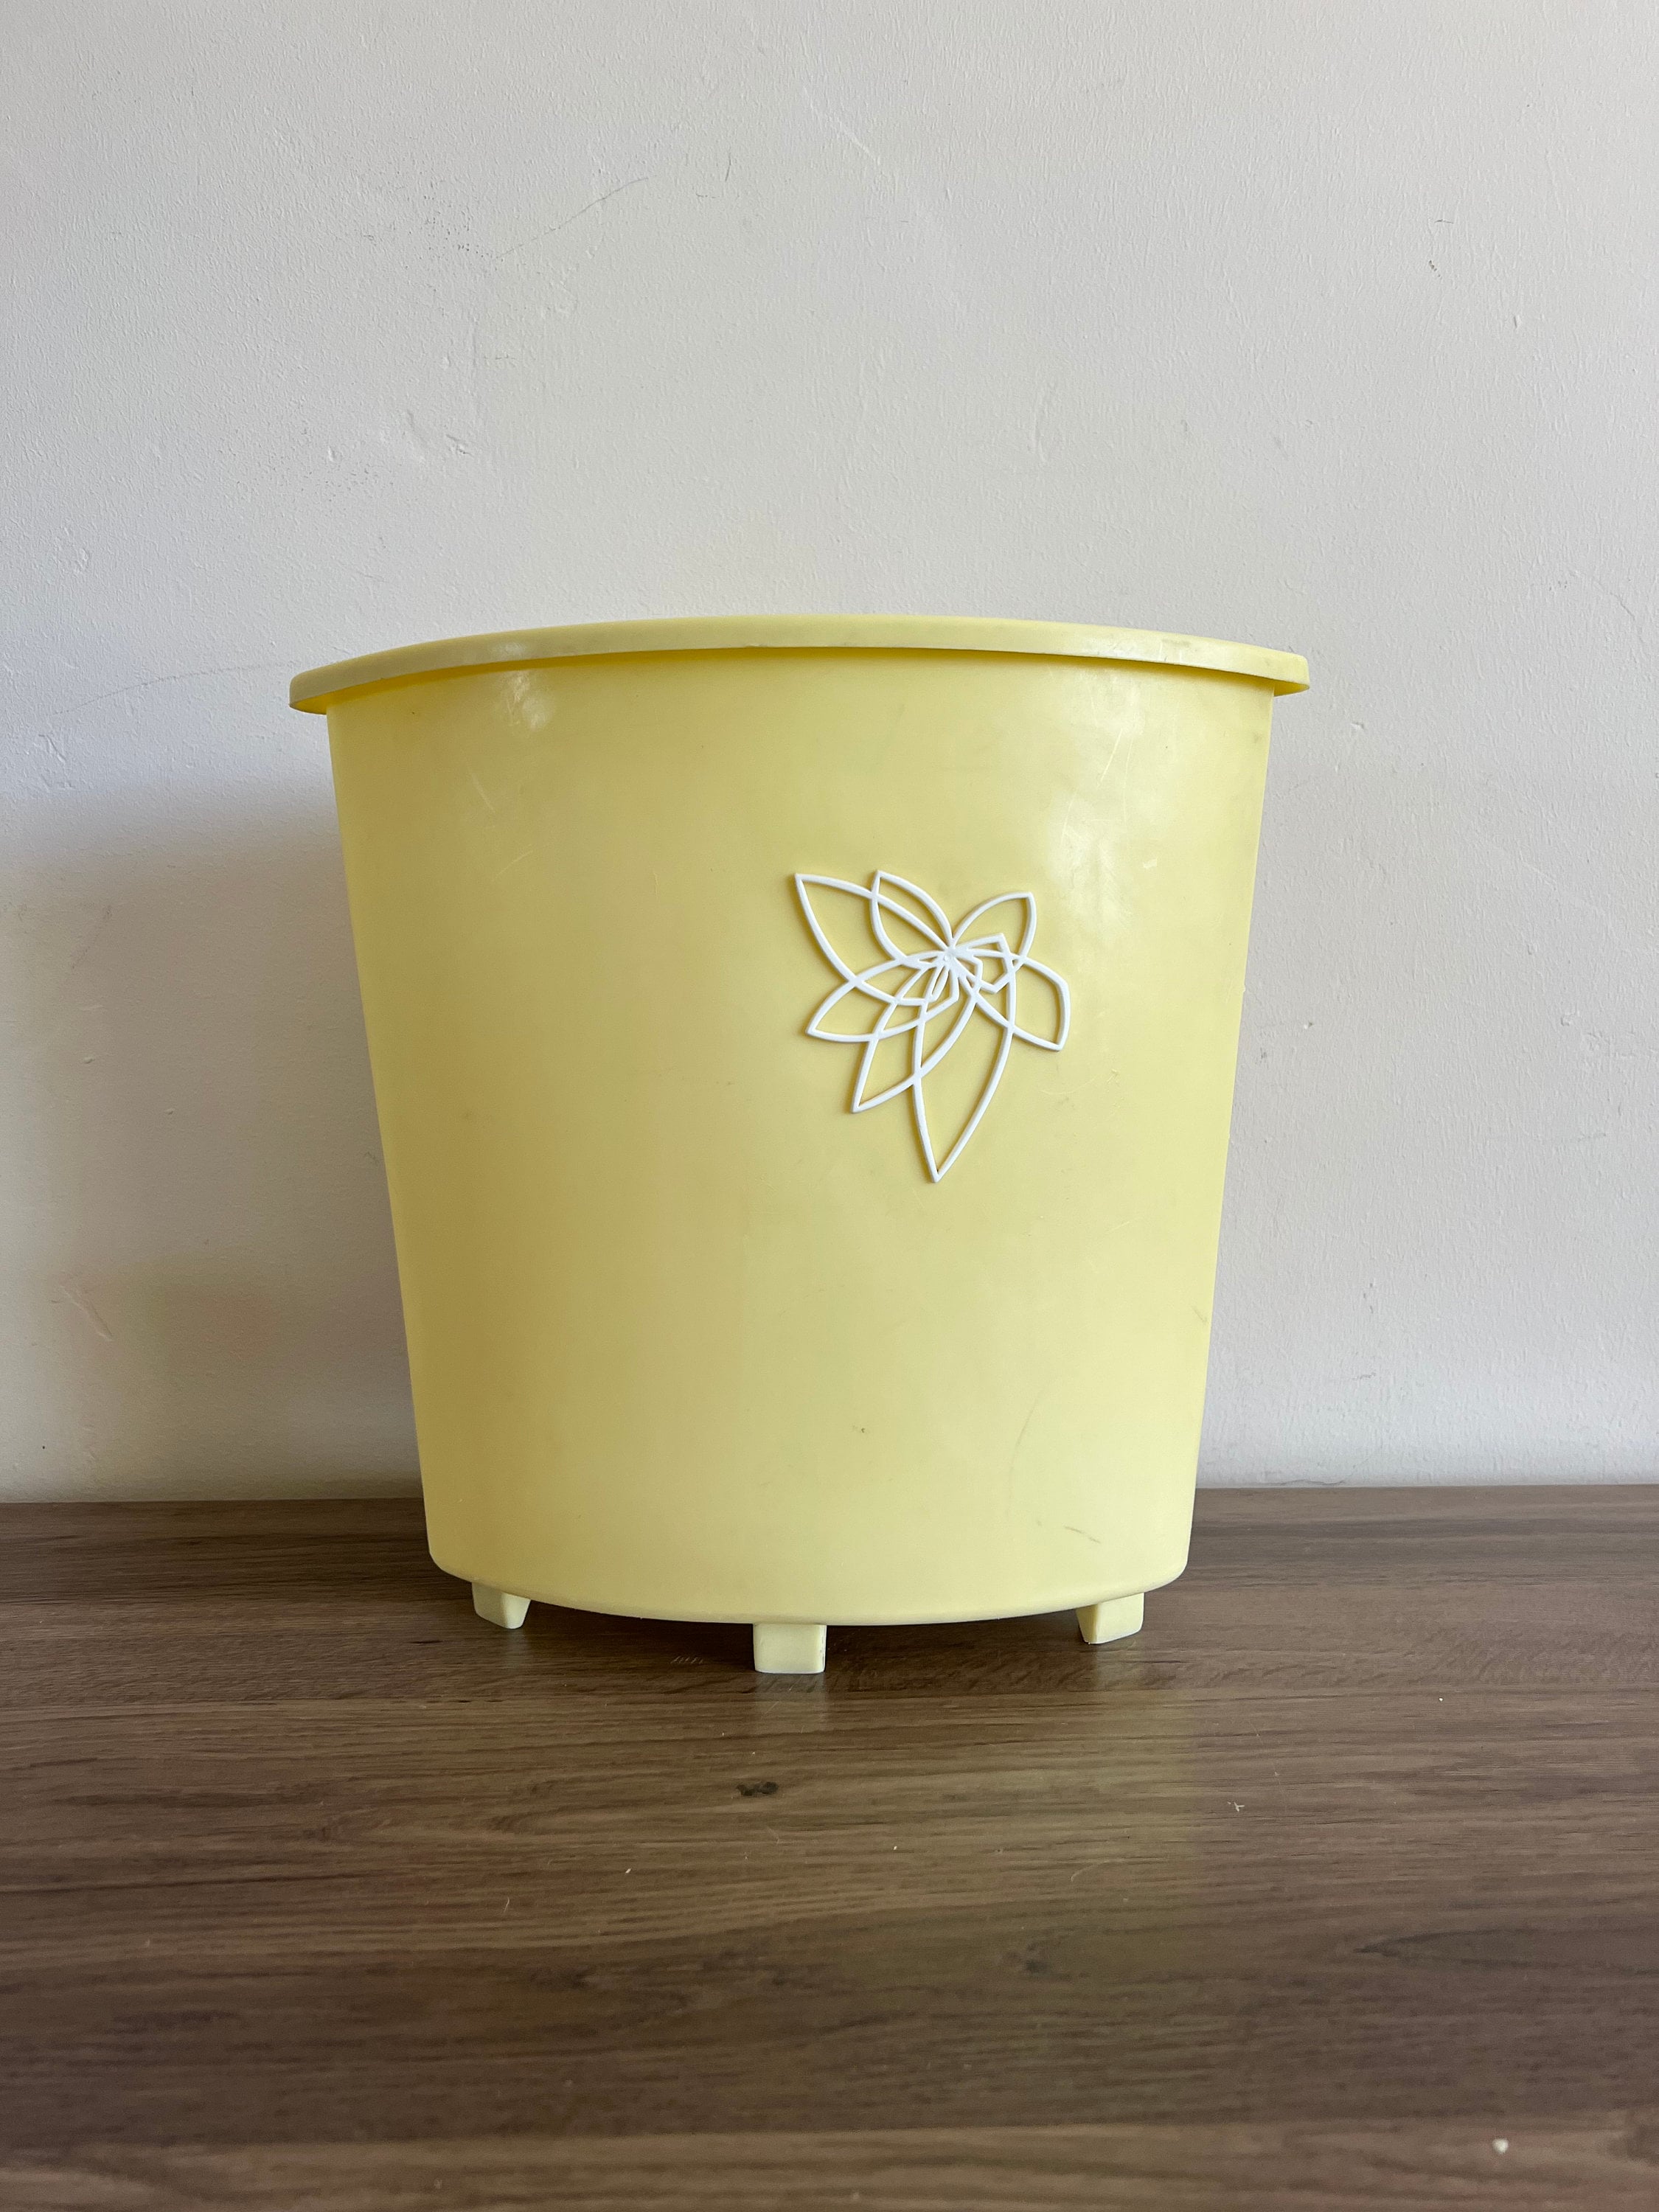 Vintage French Mid Century Metallic Teal Blue Plastic Office Trash Can,  Retro 1950s /1960s Garbage Bin From France, Old Style Desk Accessory